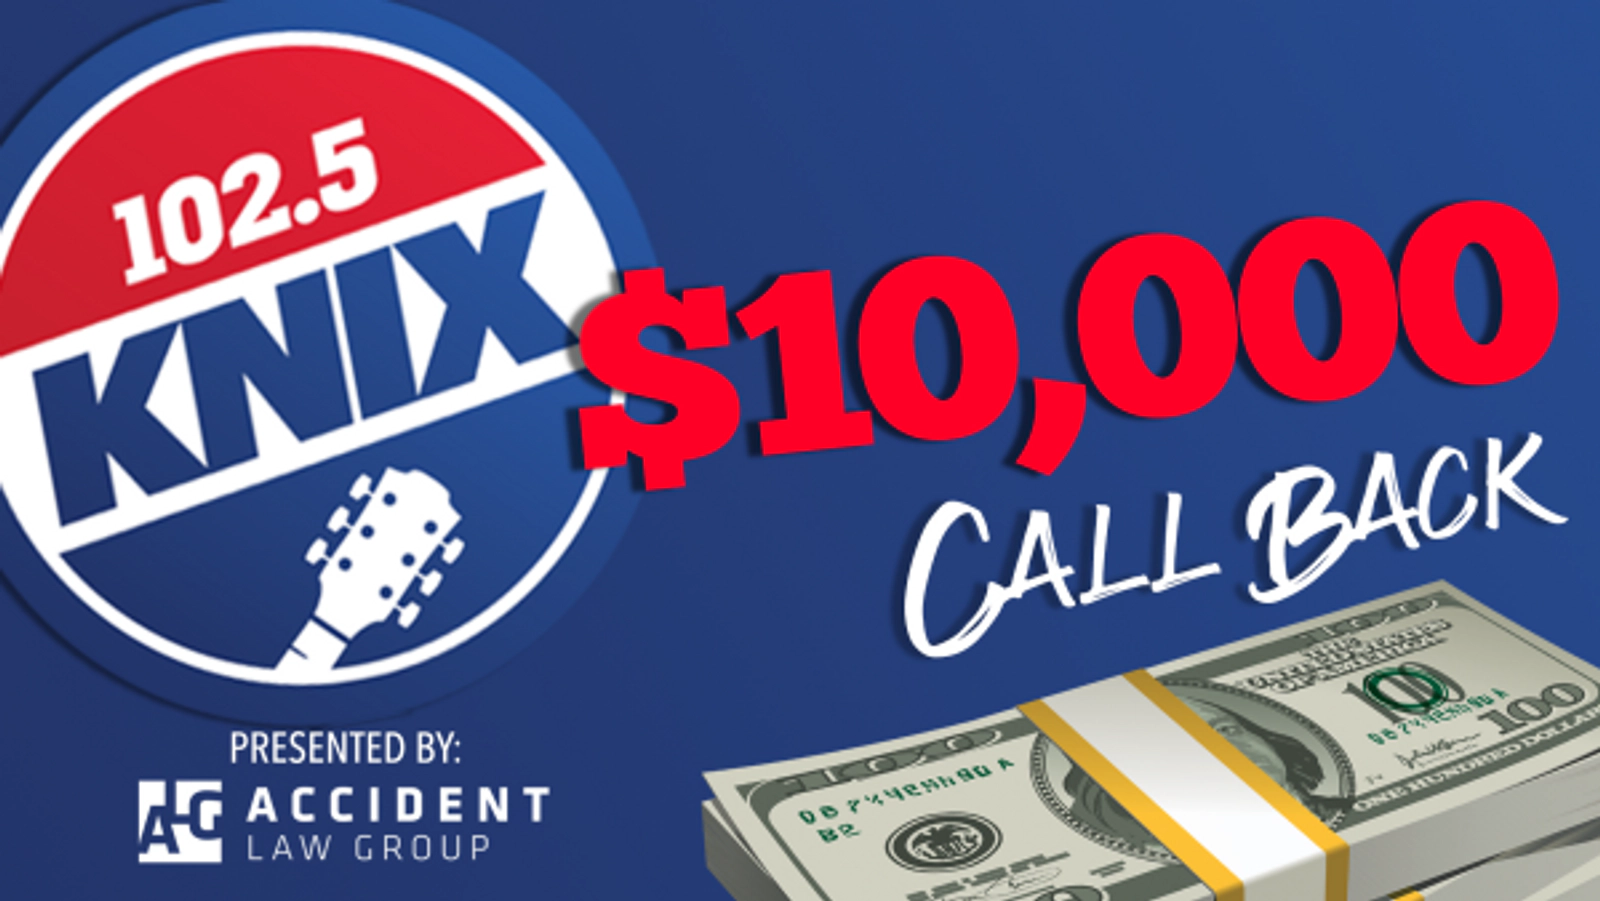 The KNIX $10,000 Call Back Presented by Accident Law Group, 102.5 KNIX